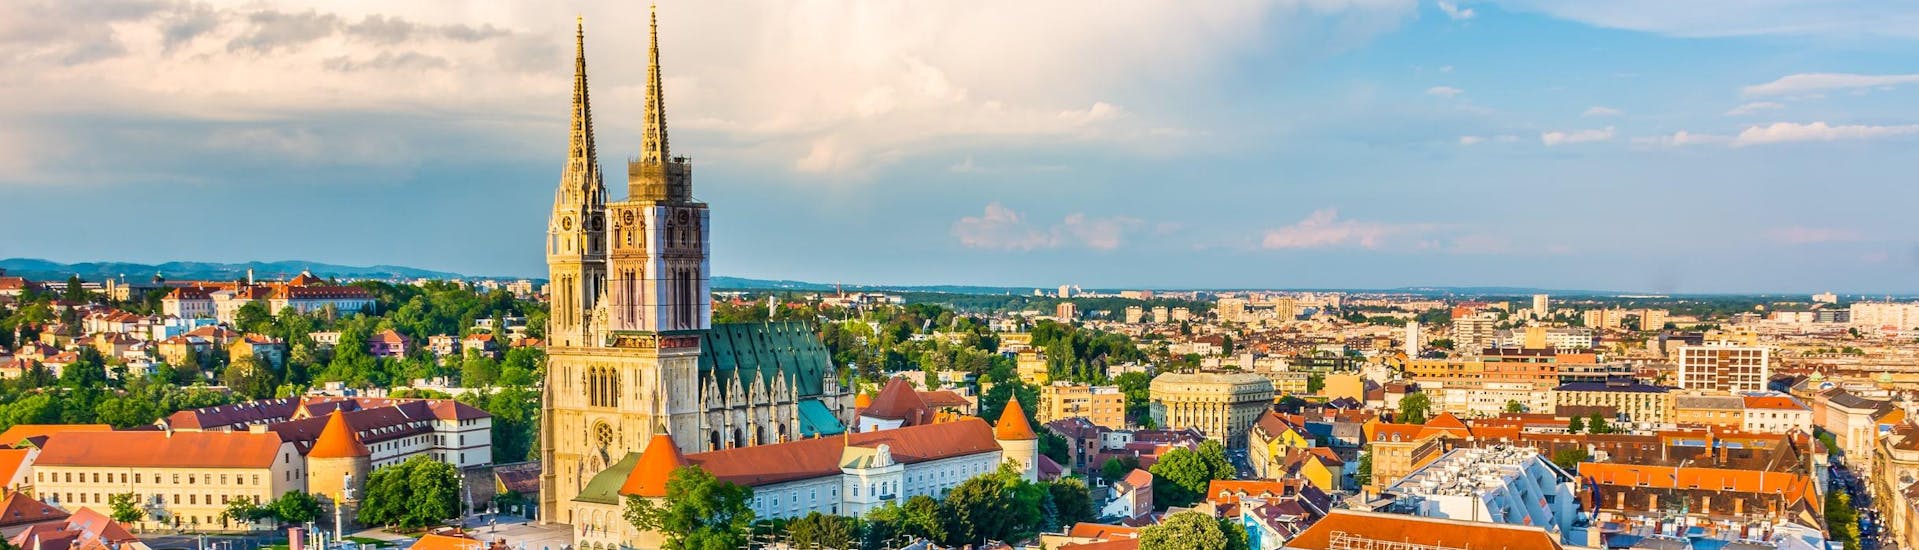 View of the inner city of Zagreb, Croatia.